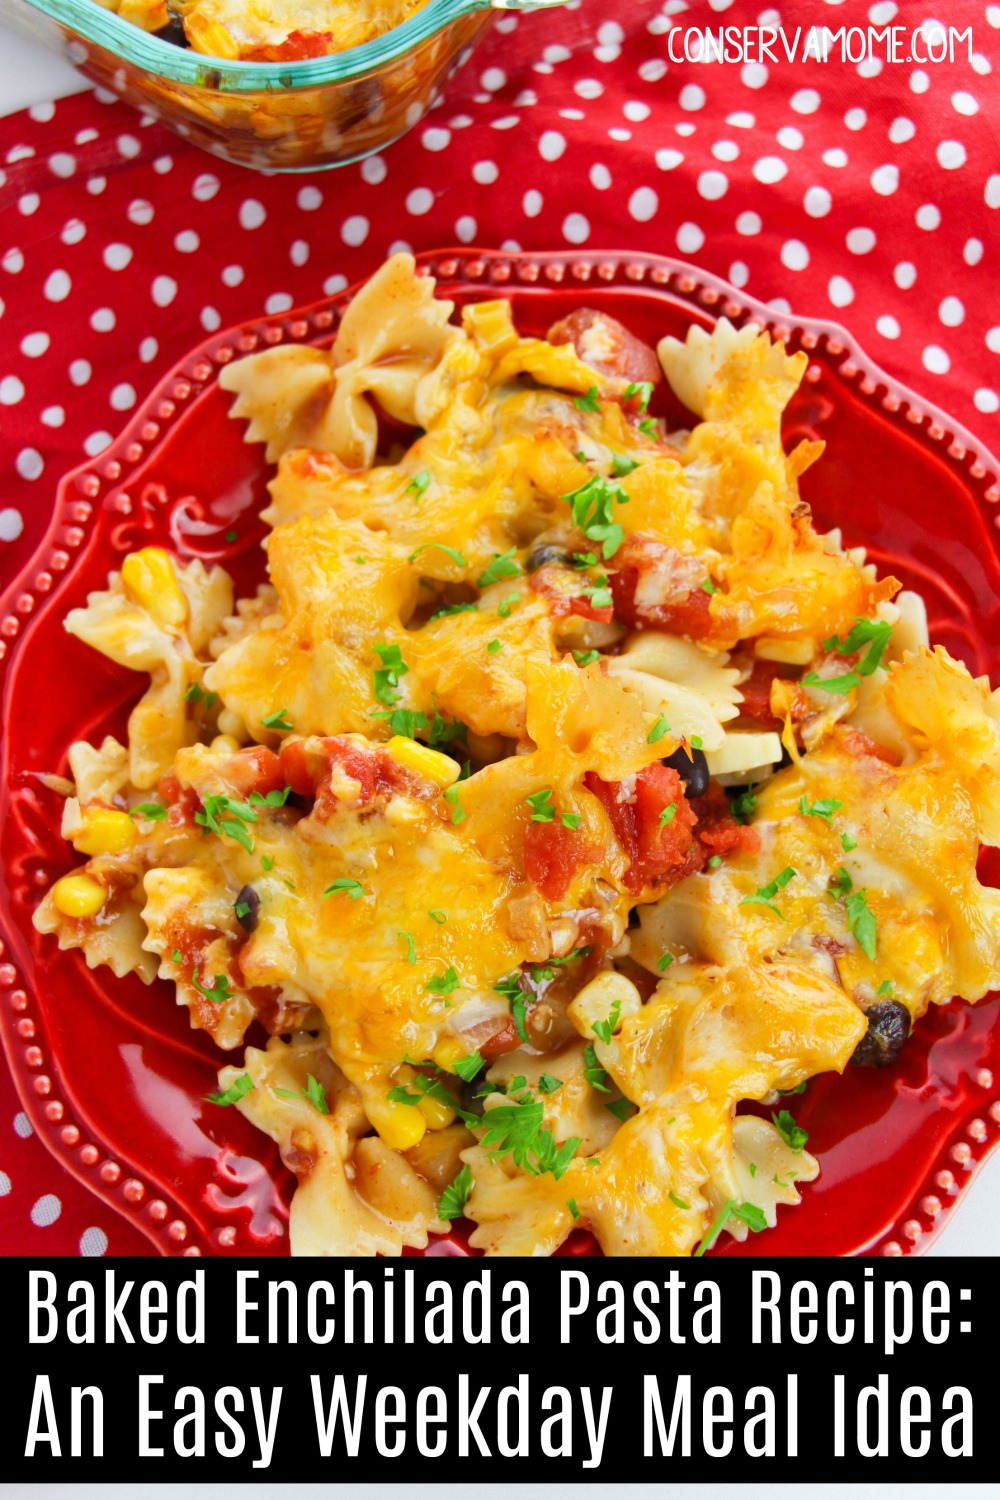 Baked Enchilada Pasta Recipe: An Easy Weekday Meal Idea